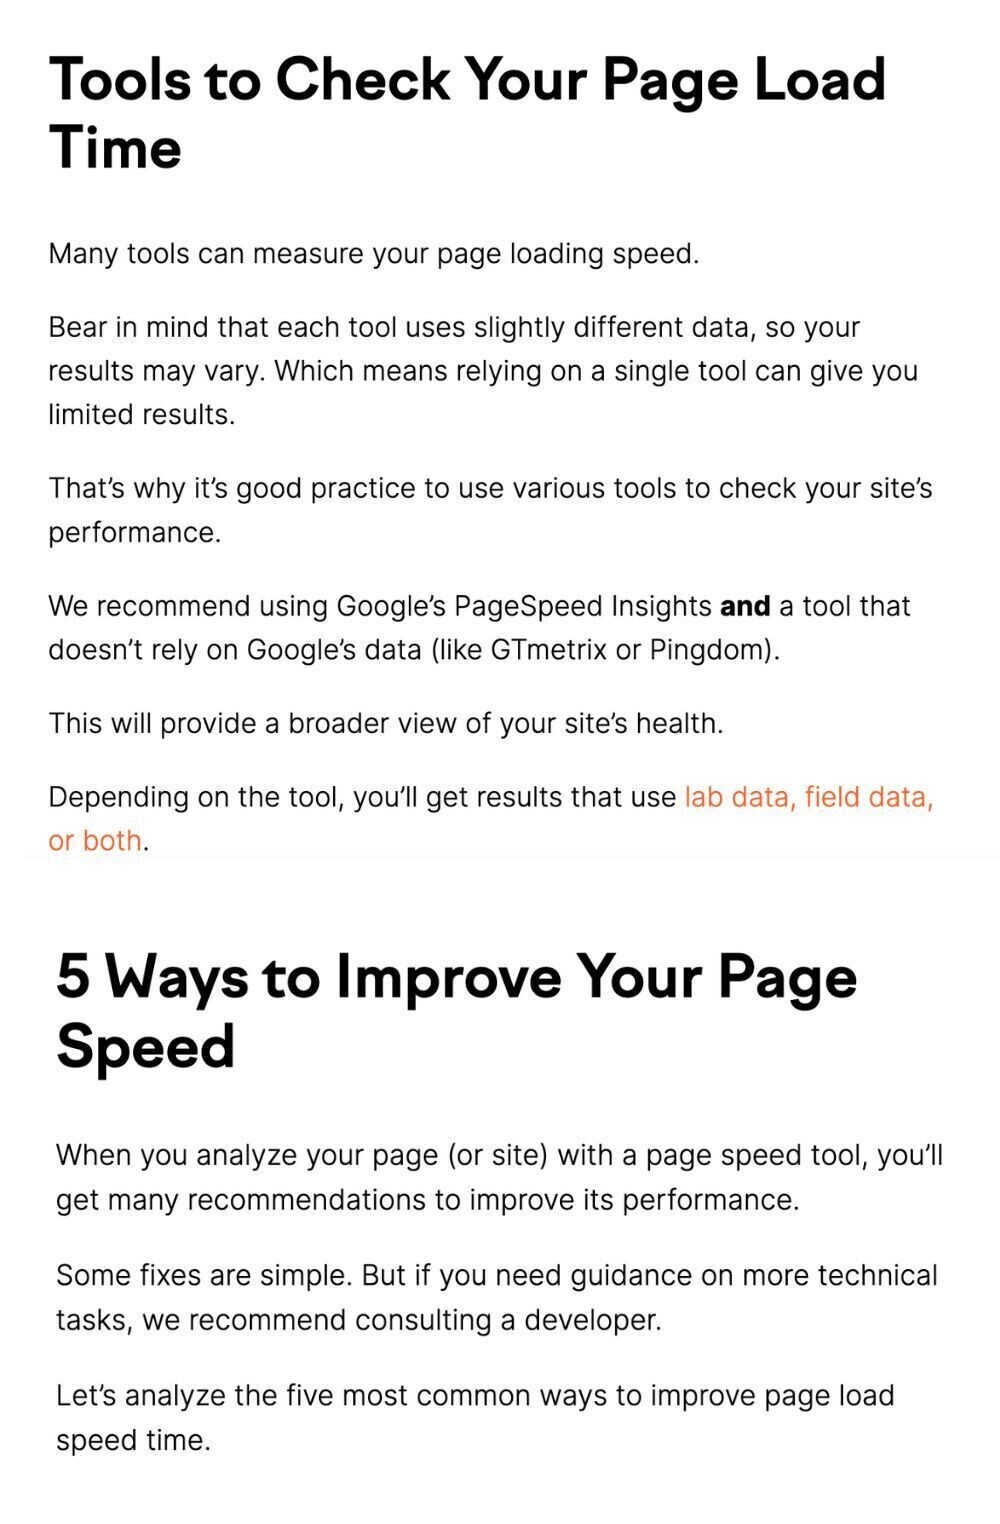 "Tools to Check Your Page Load Time" and "5 Ways to Improve Your Page Speed" headers